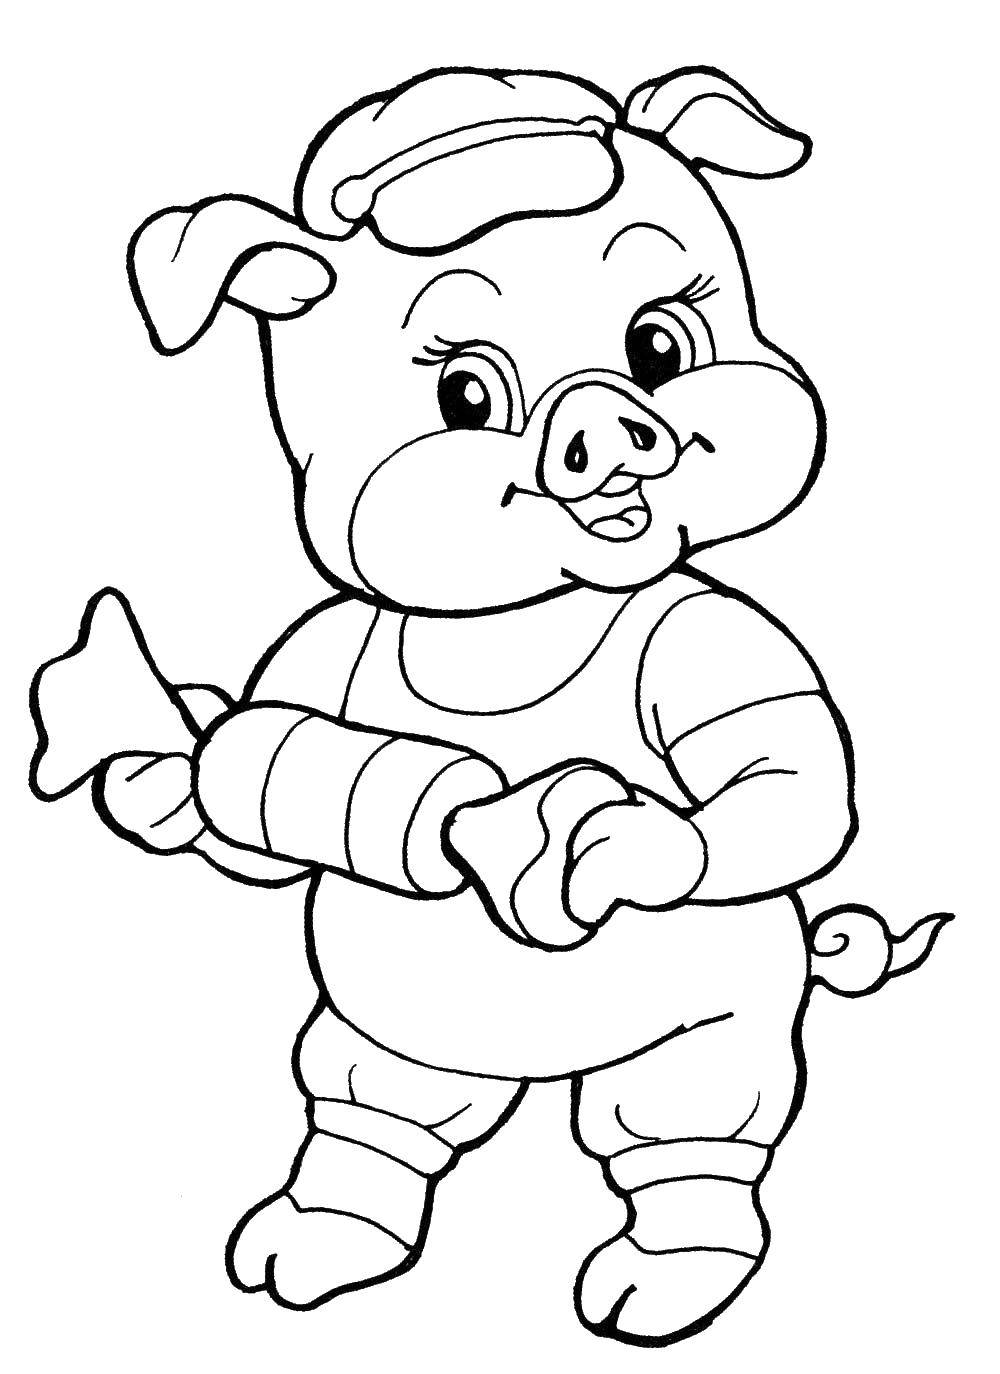 Coloring Pig with candy. Category Pets allowed. Tags:  Animals, pig.